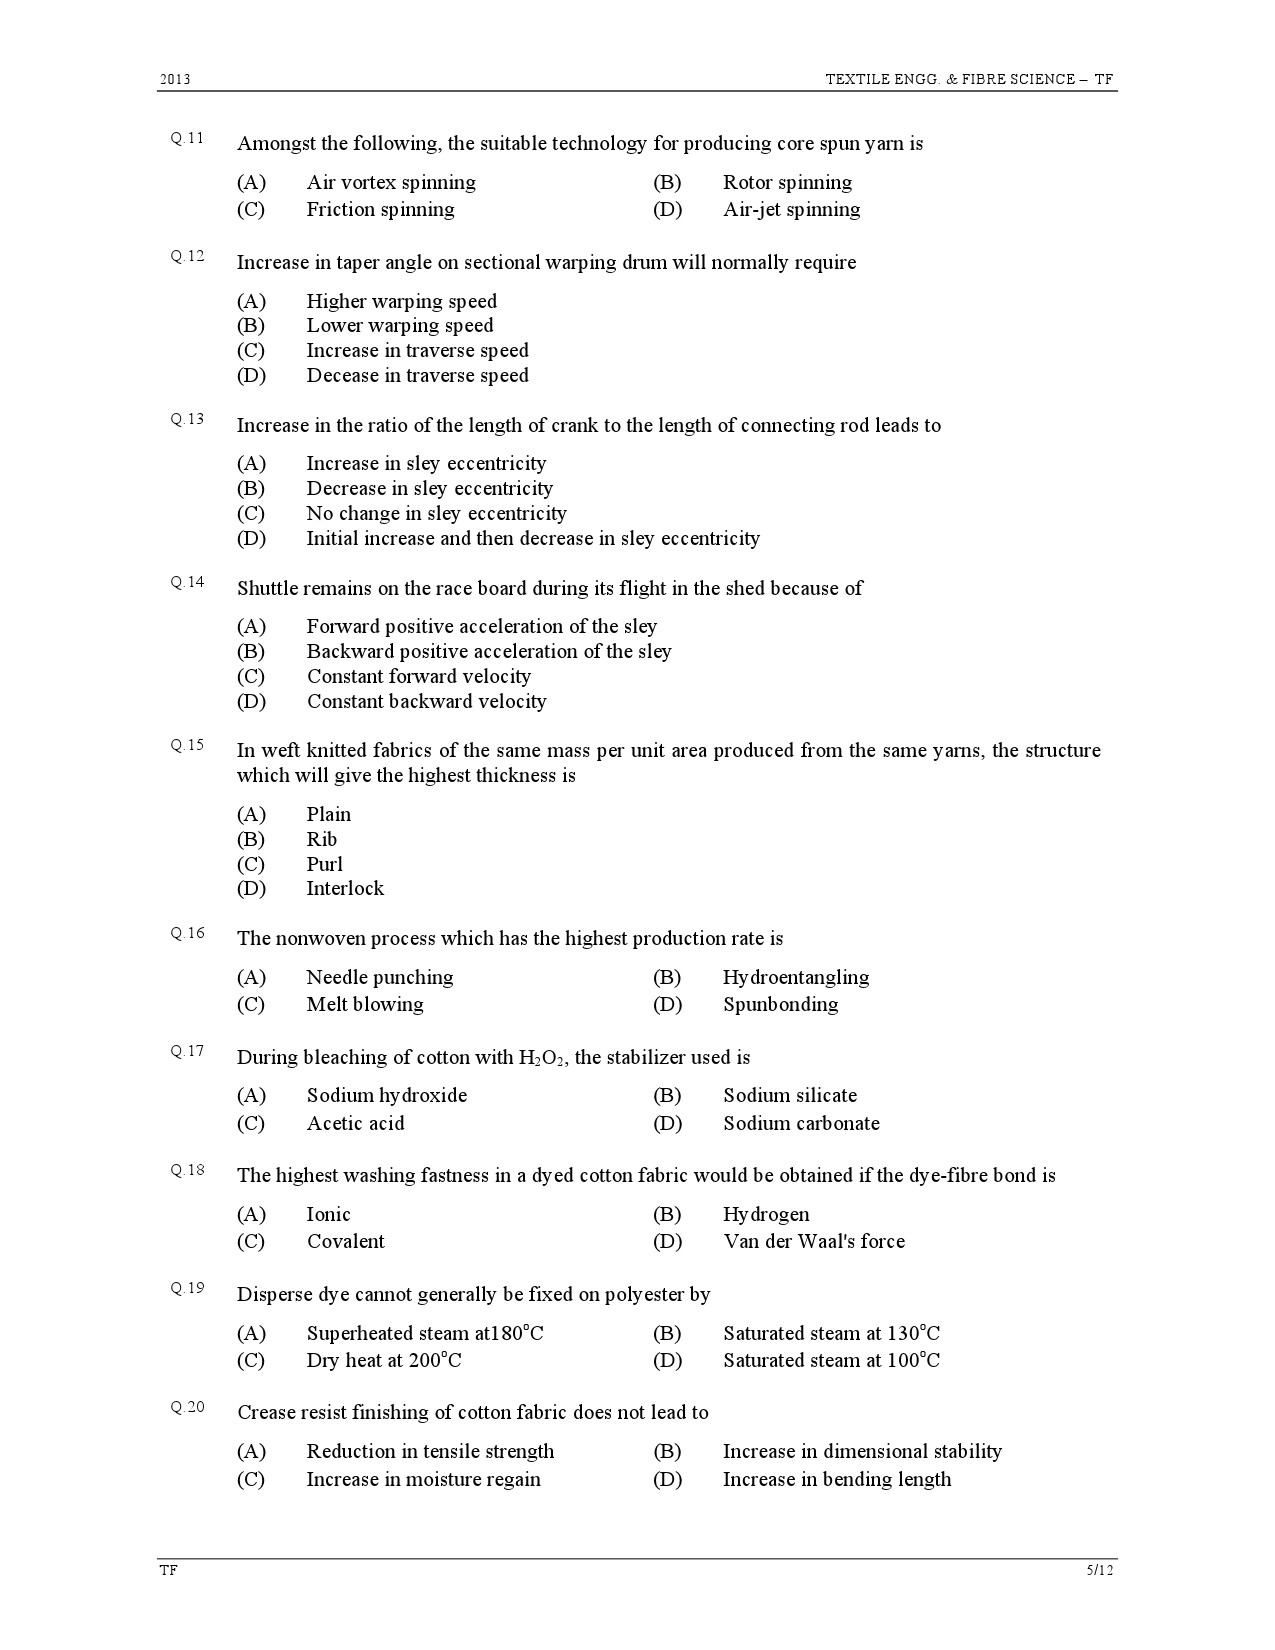 GATE Exam Question Paper 2013 Textile Engineering and Fibre Science 5